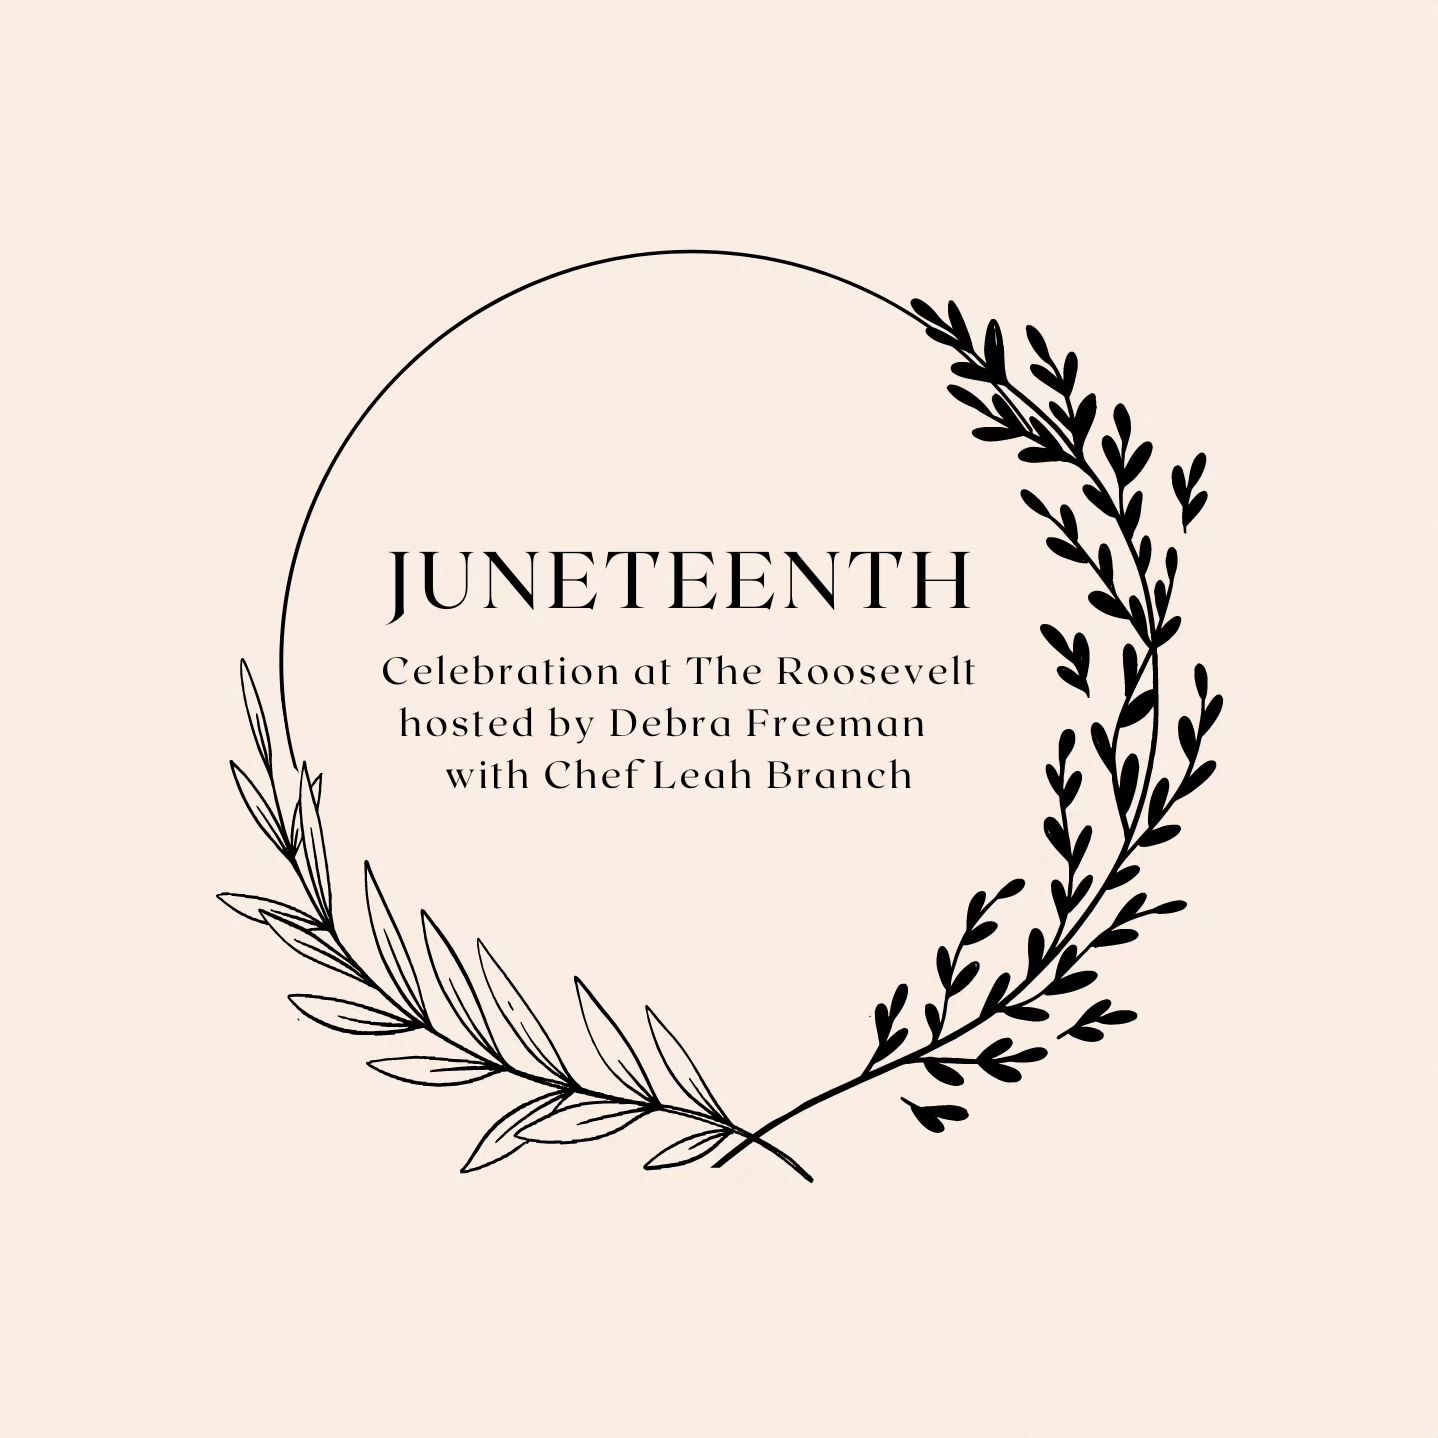 Juneteenth at The Roosevelt